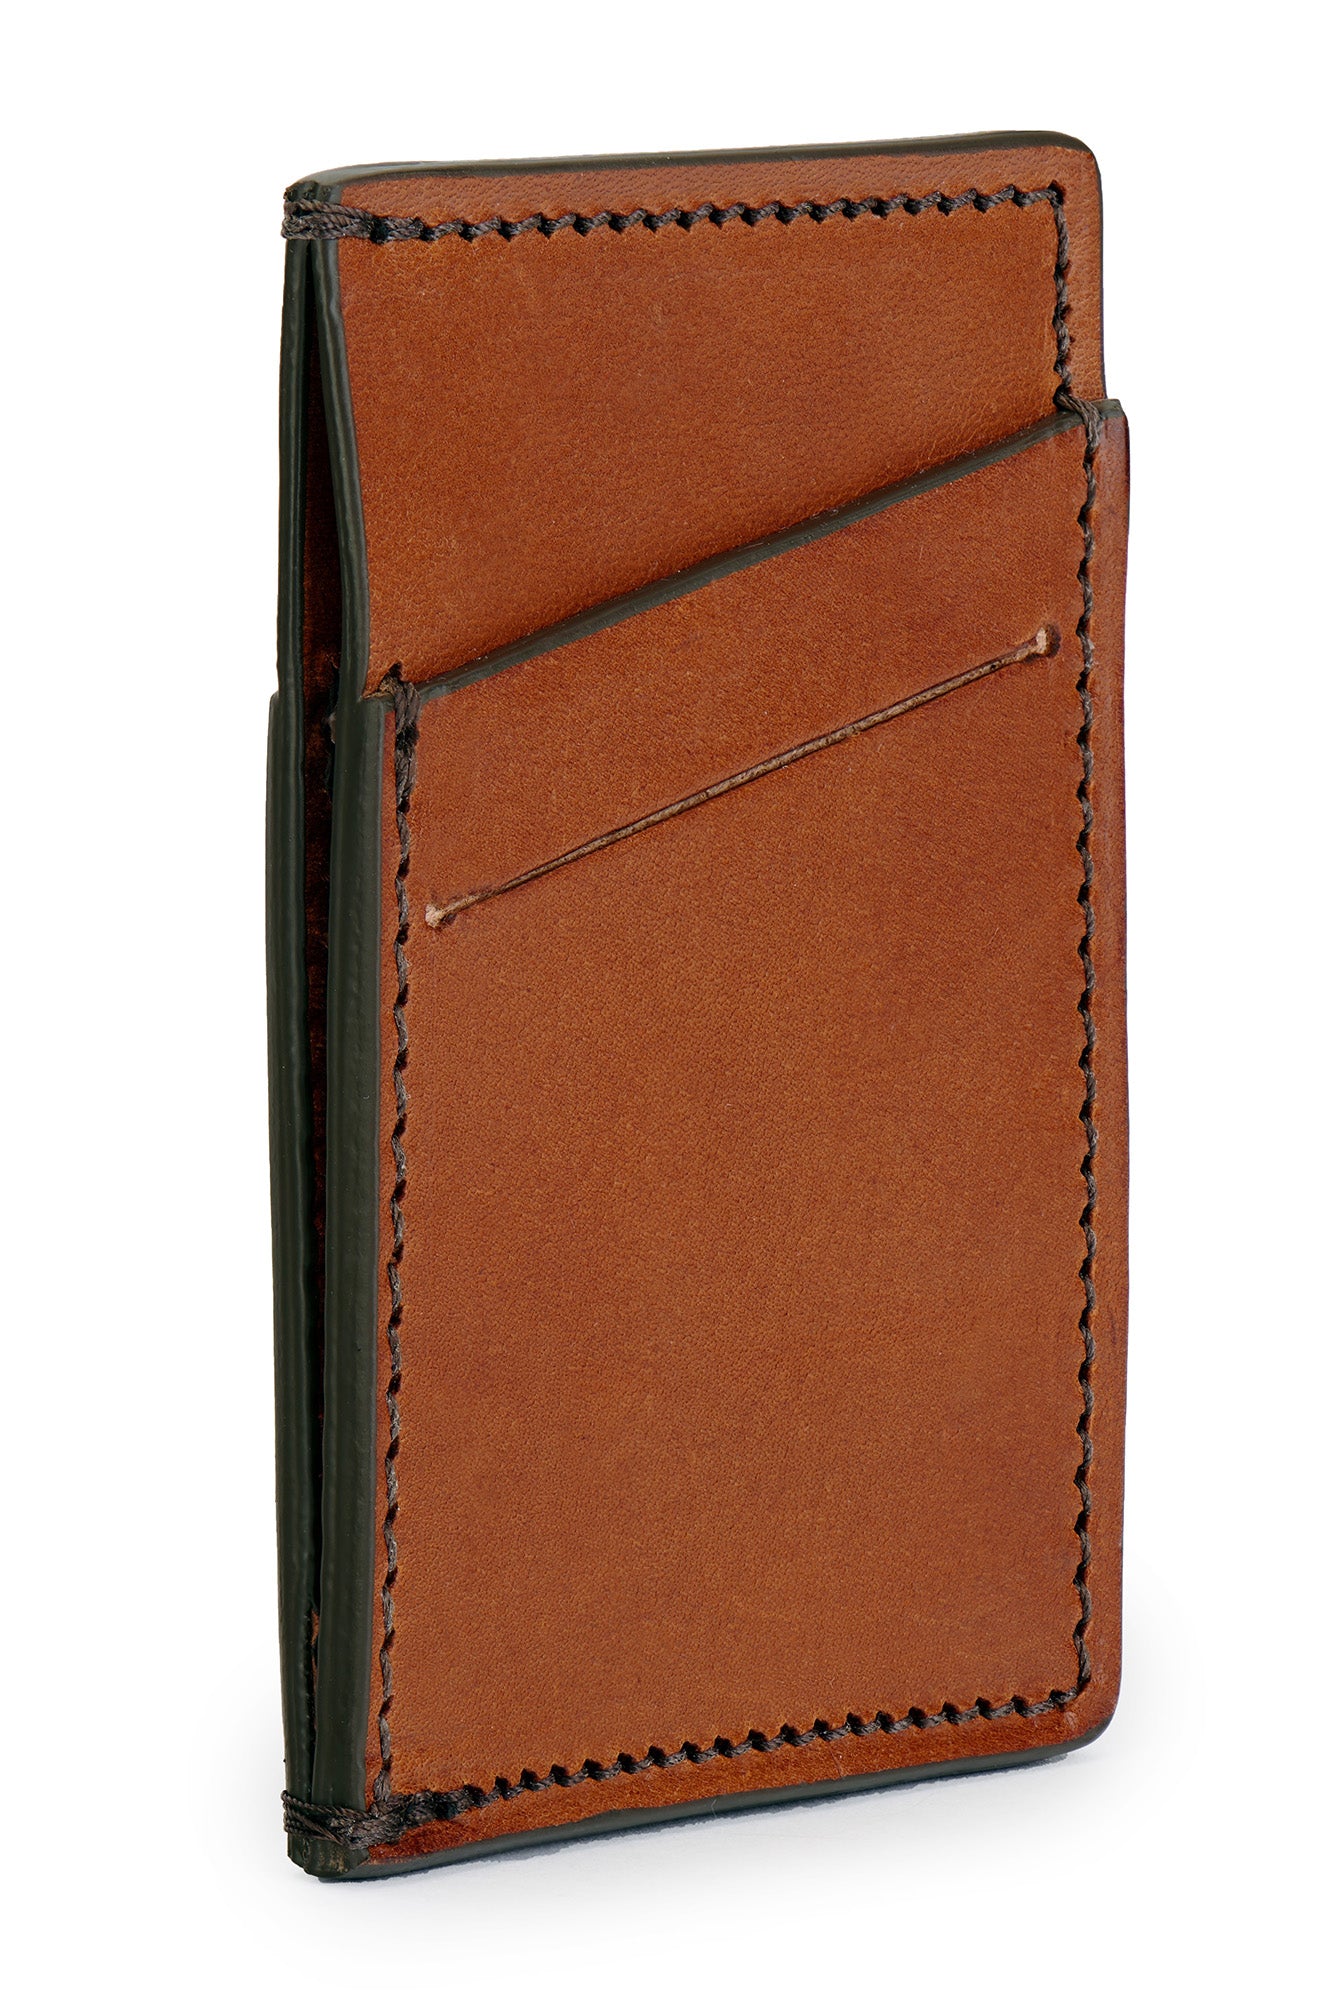 full grain leather minimalist wallet angle empty pictured in saddle tan